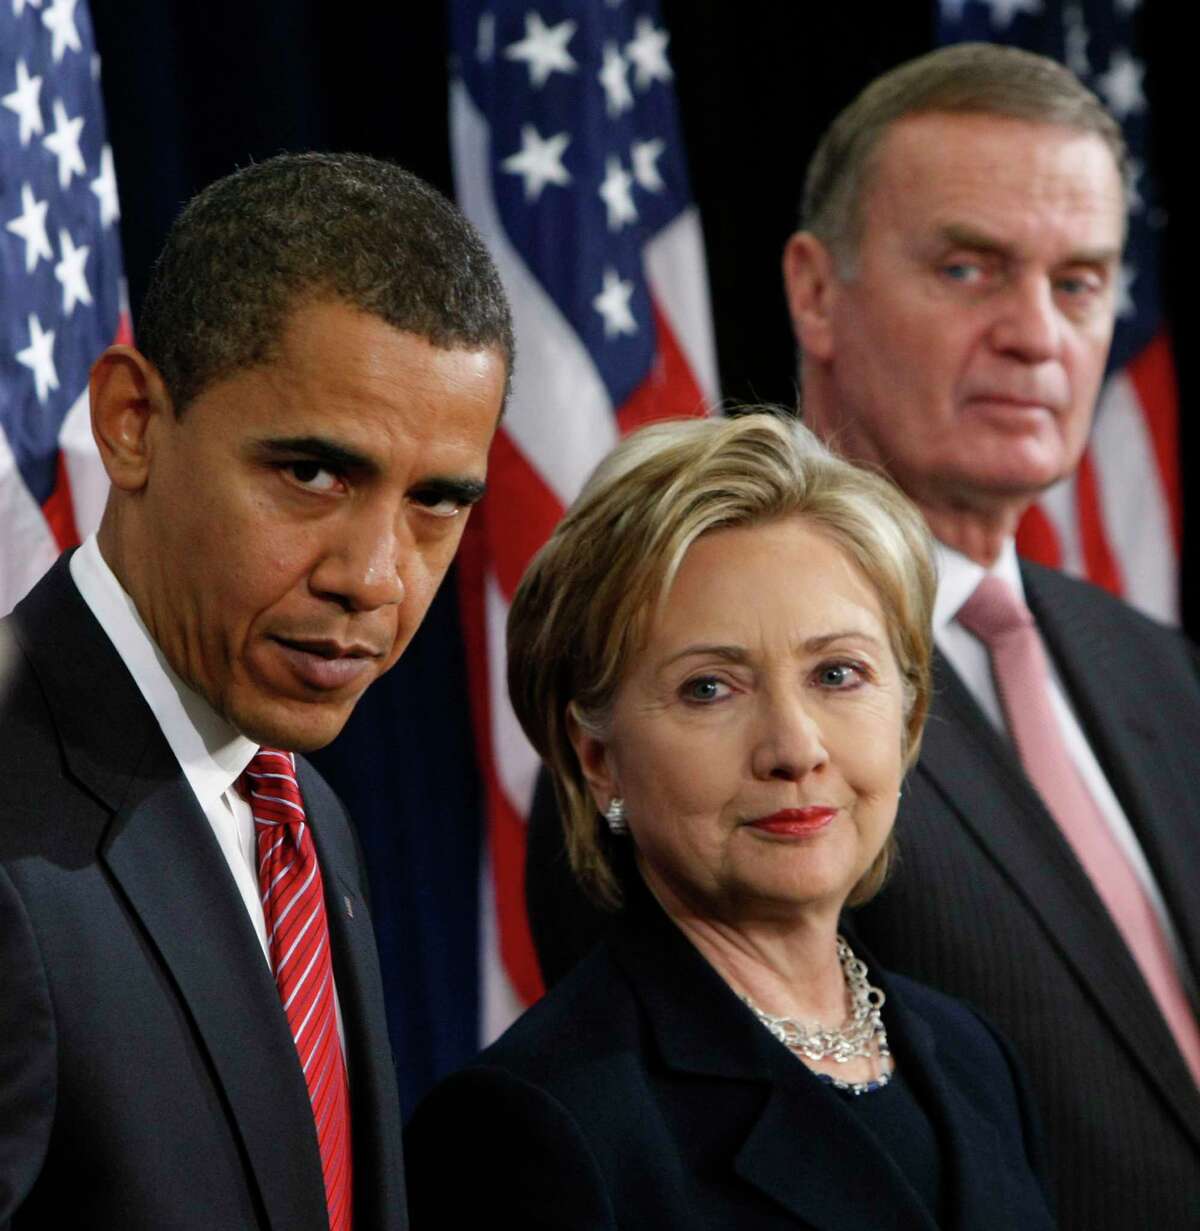 President-elect Barack Obama, left, stands with Secretary of State-designate Sen. Hillary Rodham Clinton, D-N.Y., center, and National Security Adviser-designate Ret. Marine Gen. James Jones, right, at a news conference in Chicago, Dec. 1, 2008. (AP Photo/Pablo Martinez Monsivais)